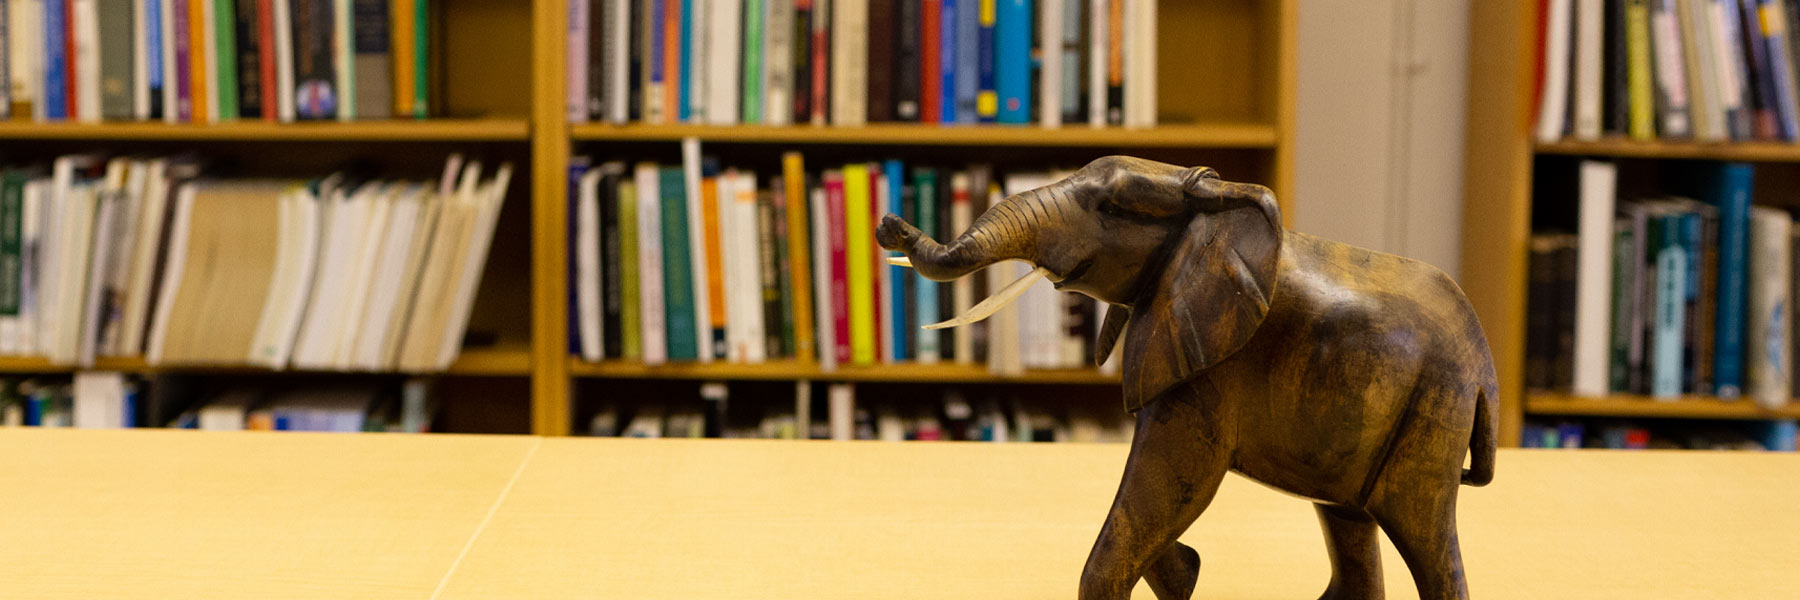 A charming carved elephant against a stack of books in the Ostrom Workshop library. 